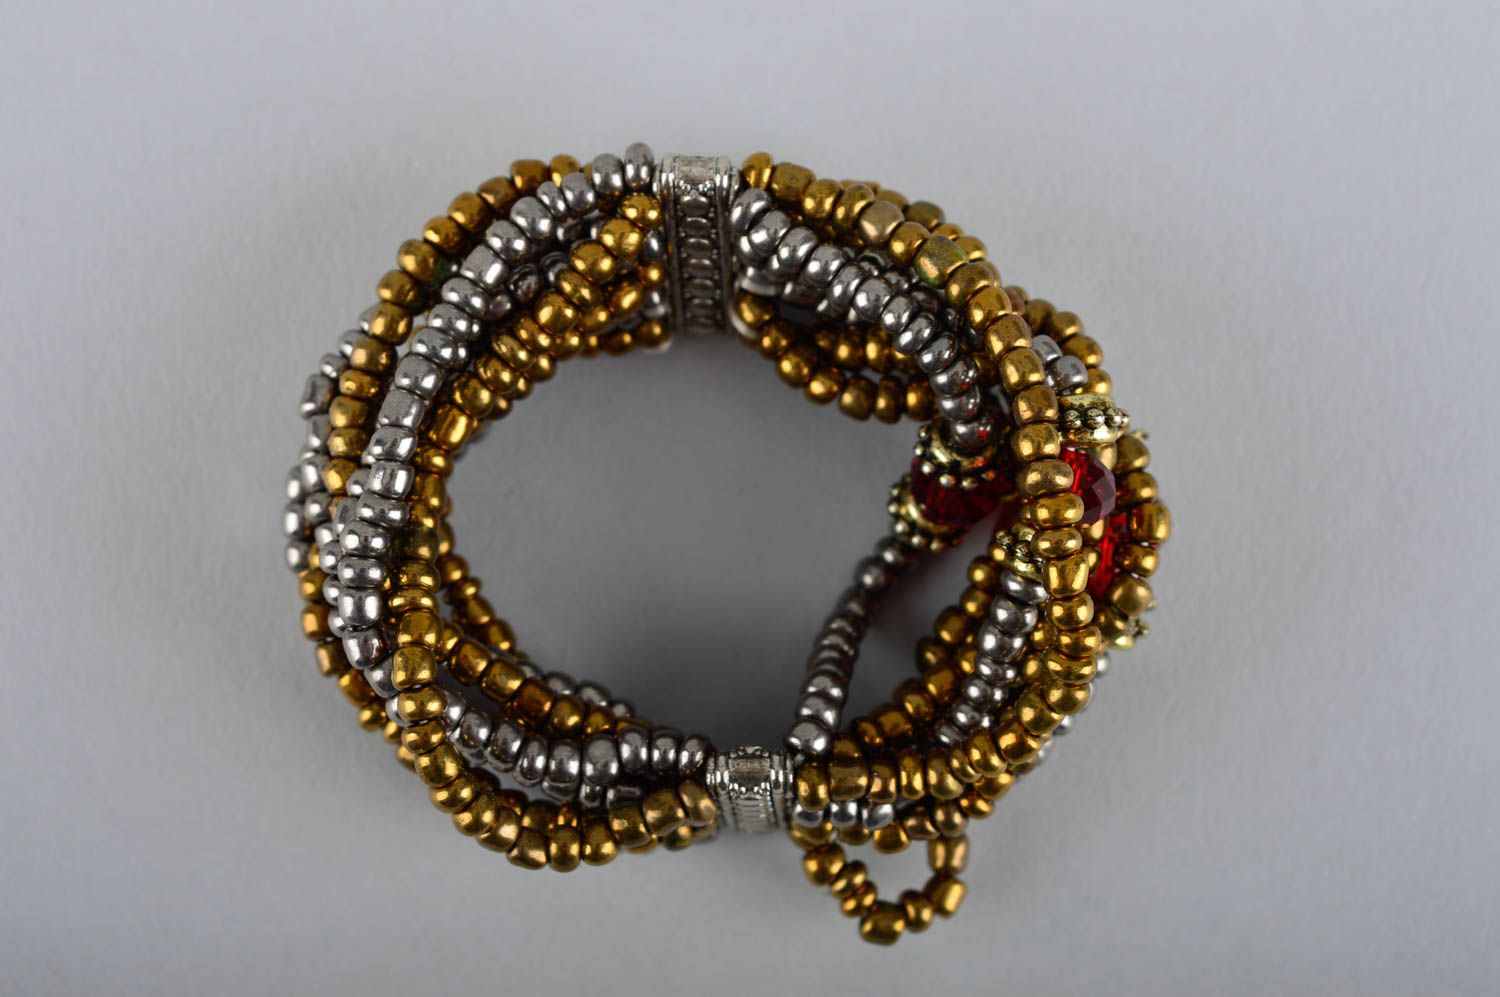 Multi-row wrist line bracelet made of silver and gold color beads for women photo 3